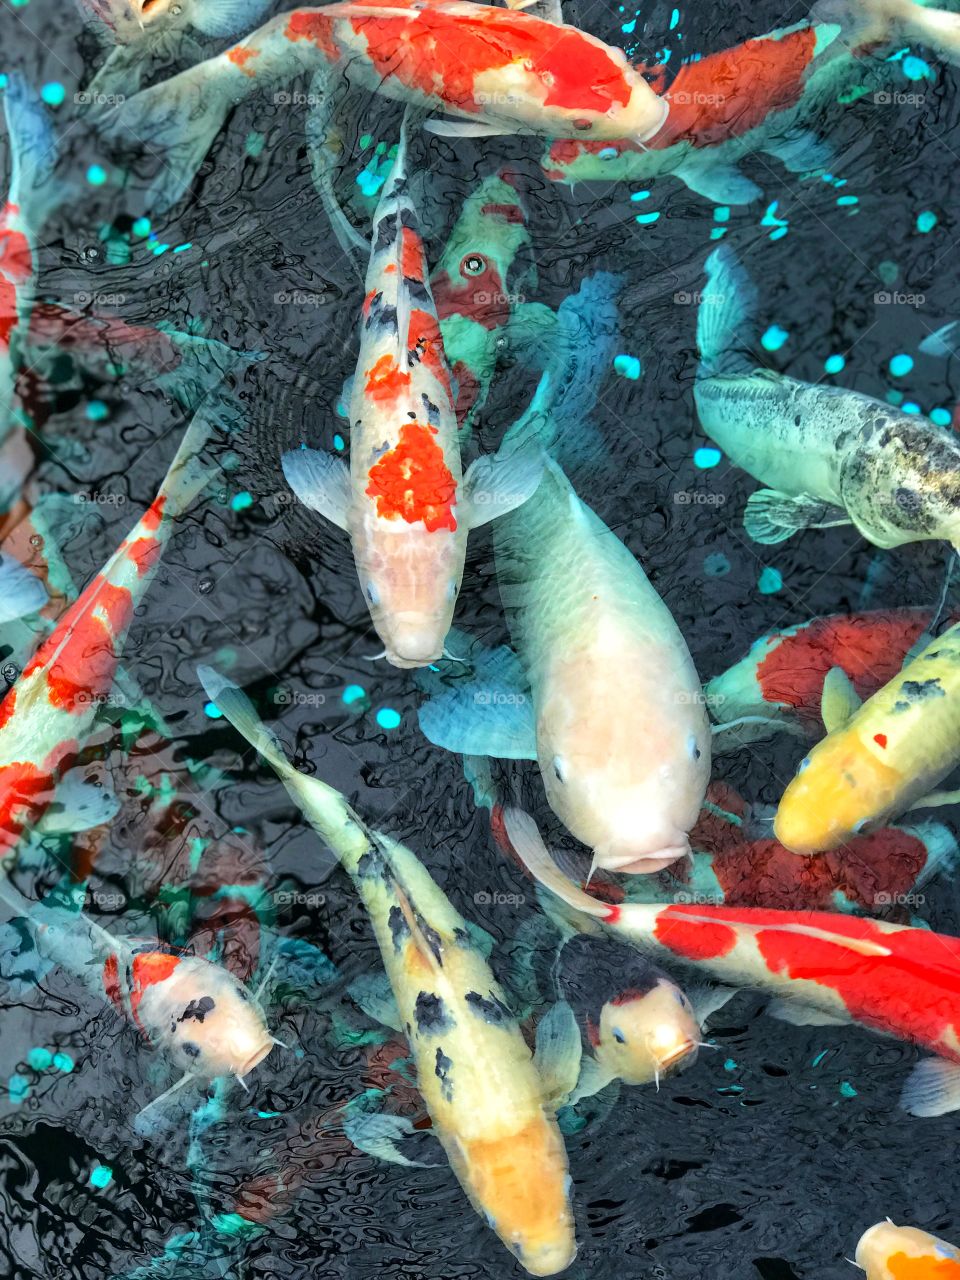 Many Koi fish Carp fish in red and orange color but some of them are special color in white silver and yellow golden color. Fish swimming in dark blue water pond pool in park garden.